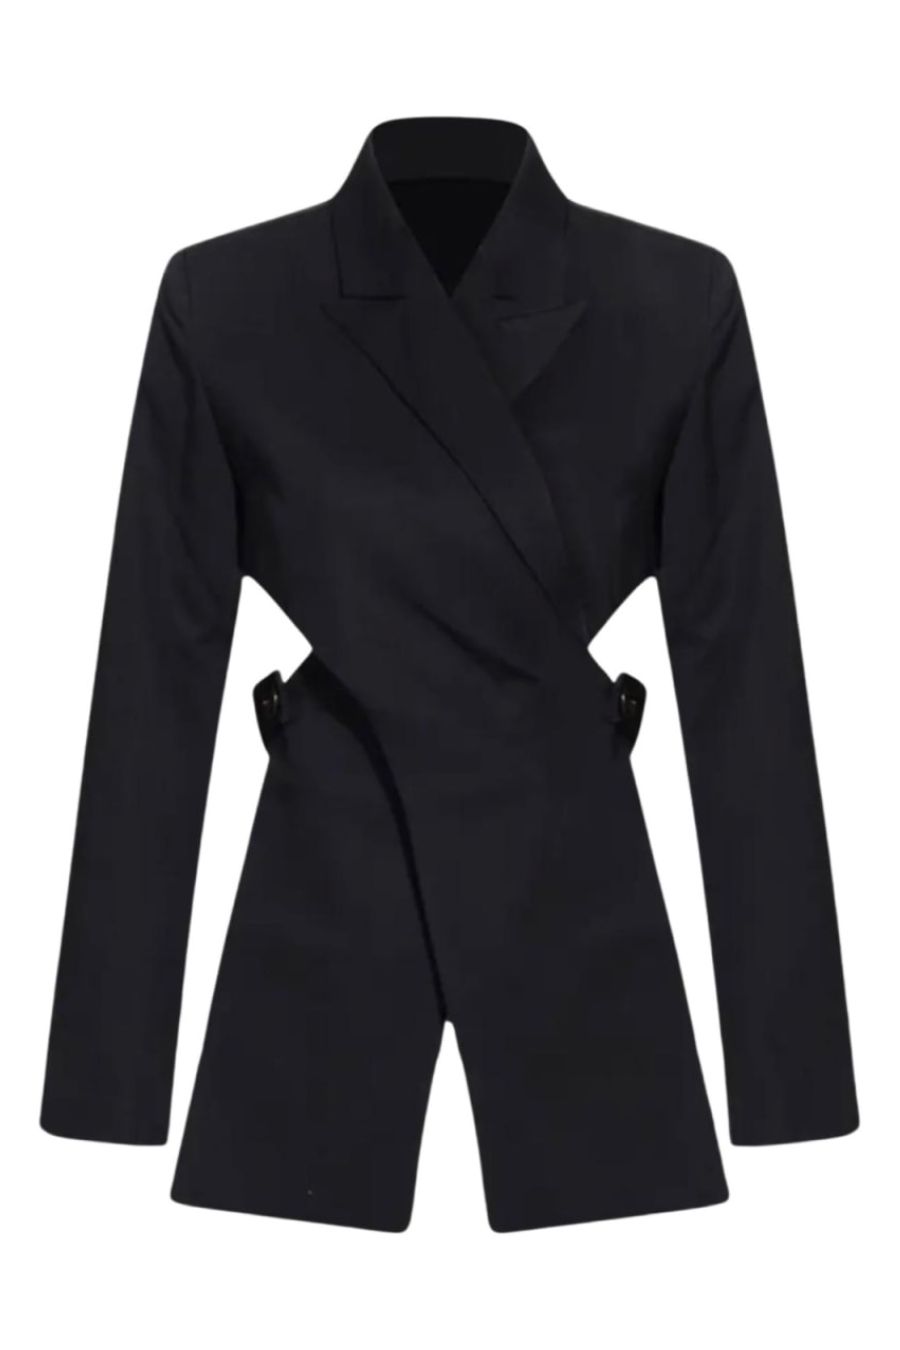 Reworked Black Blazer With Wrap Detail & Cut Out Back by London Atelier Byproduct